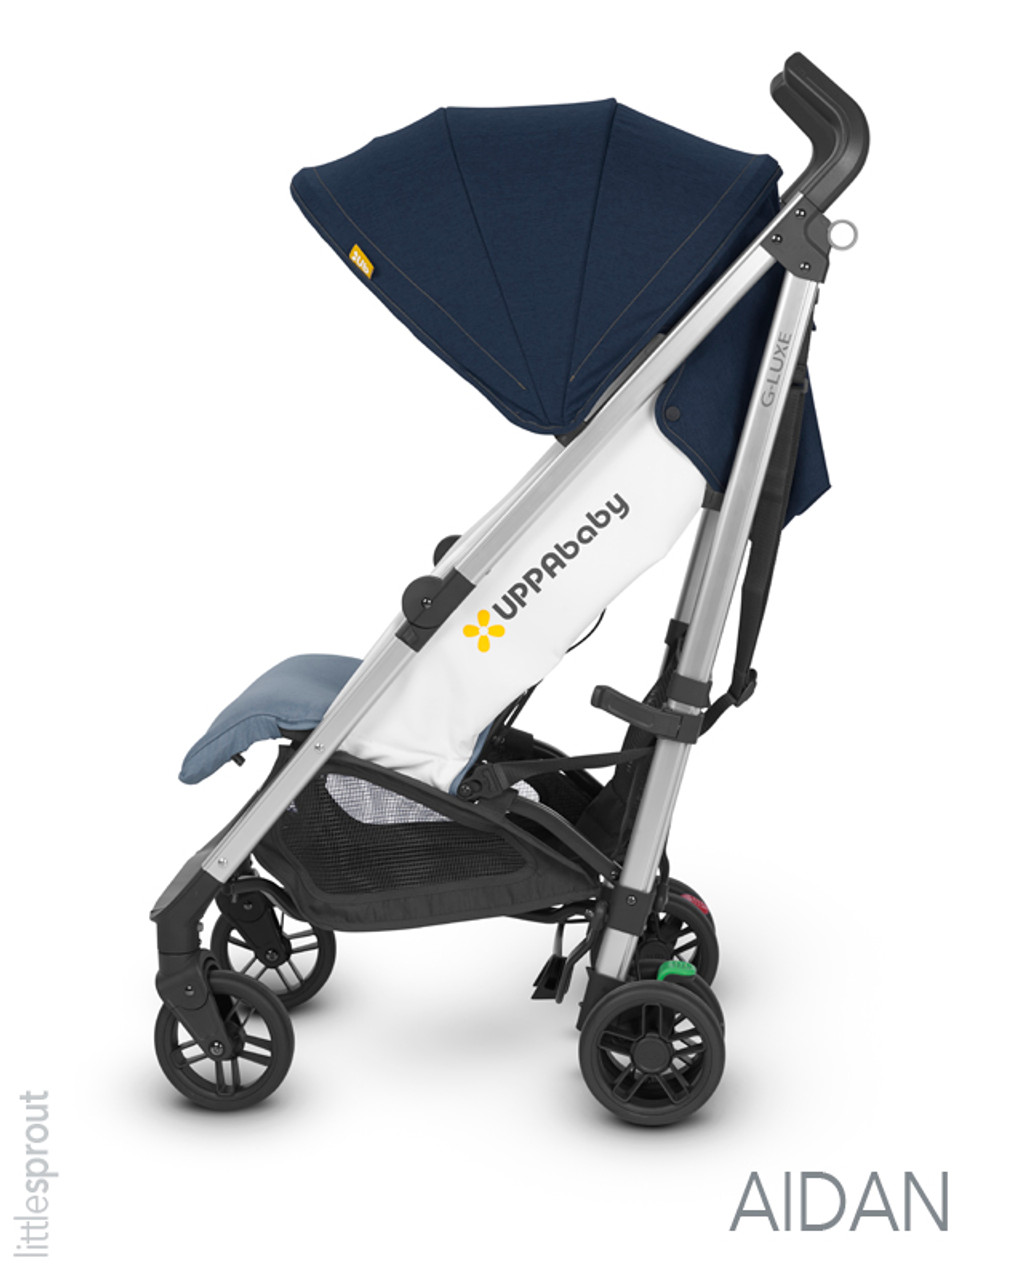 uppababy g luxe canopy